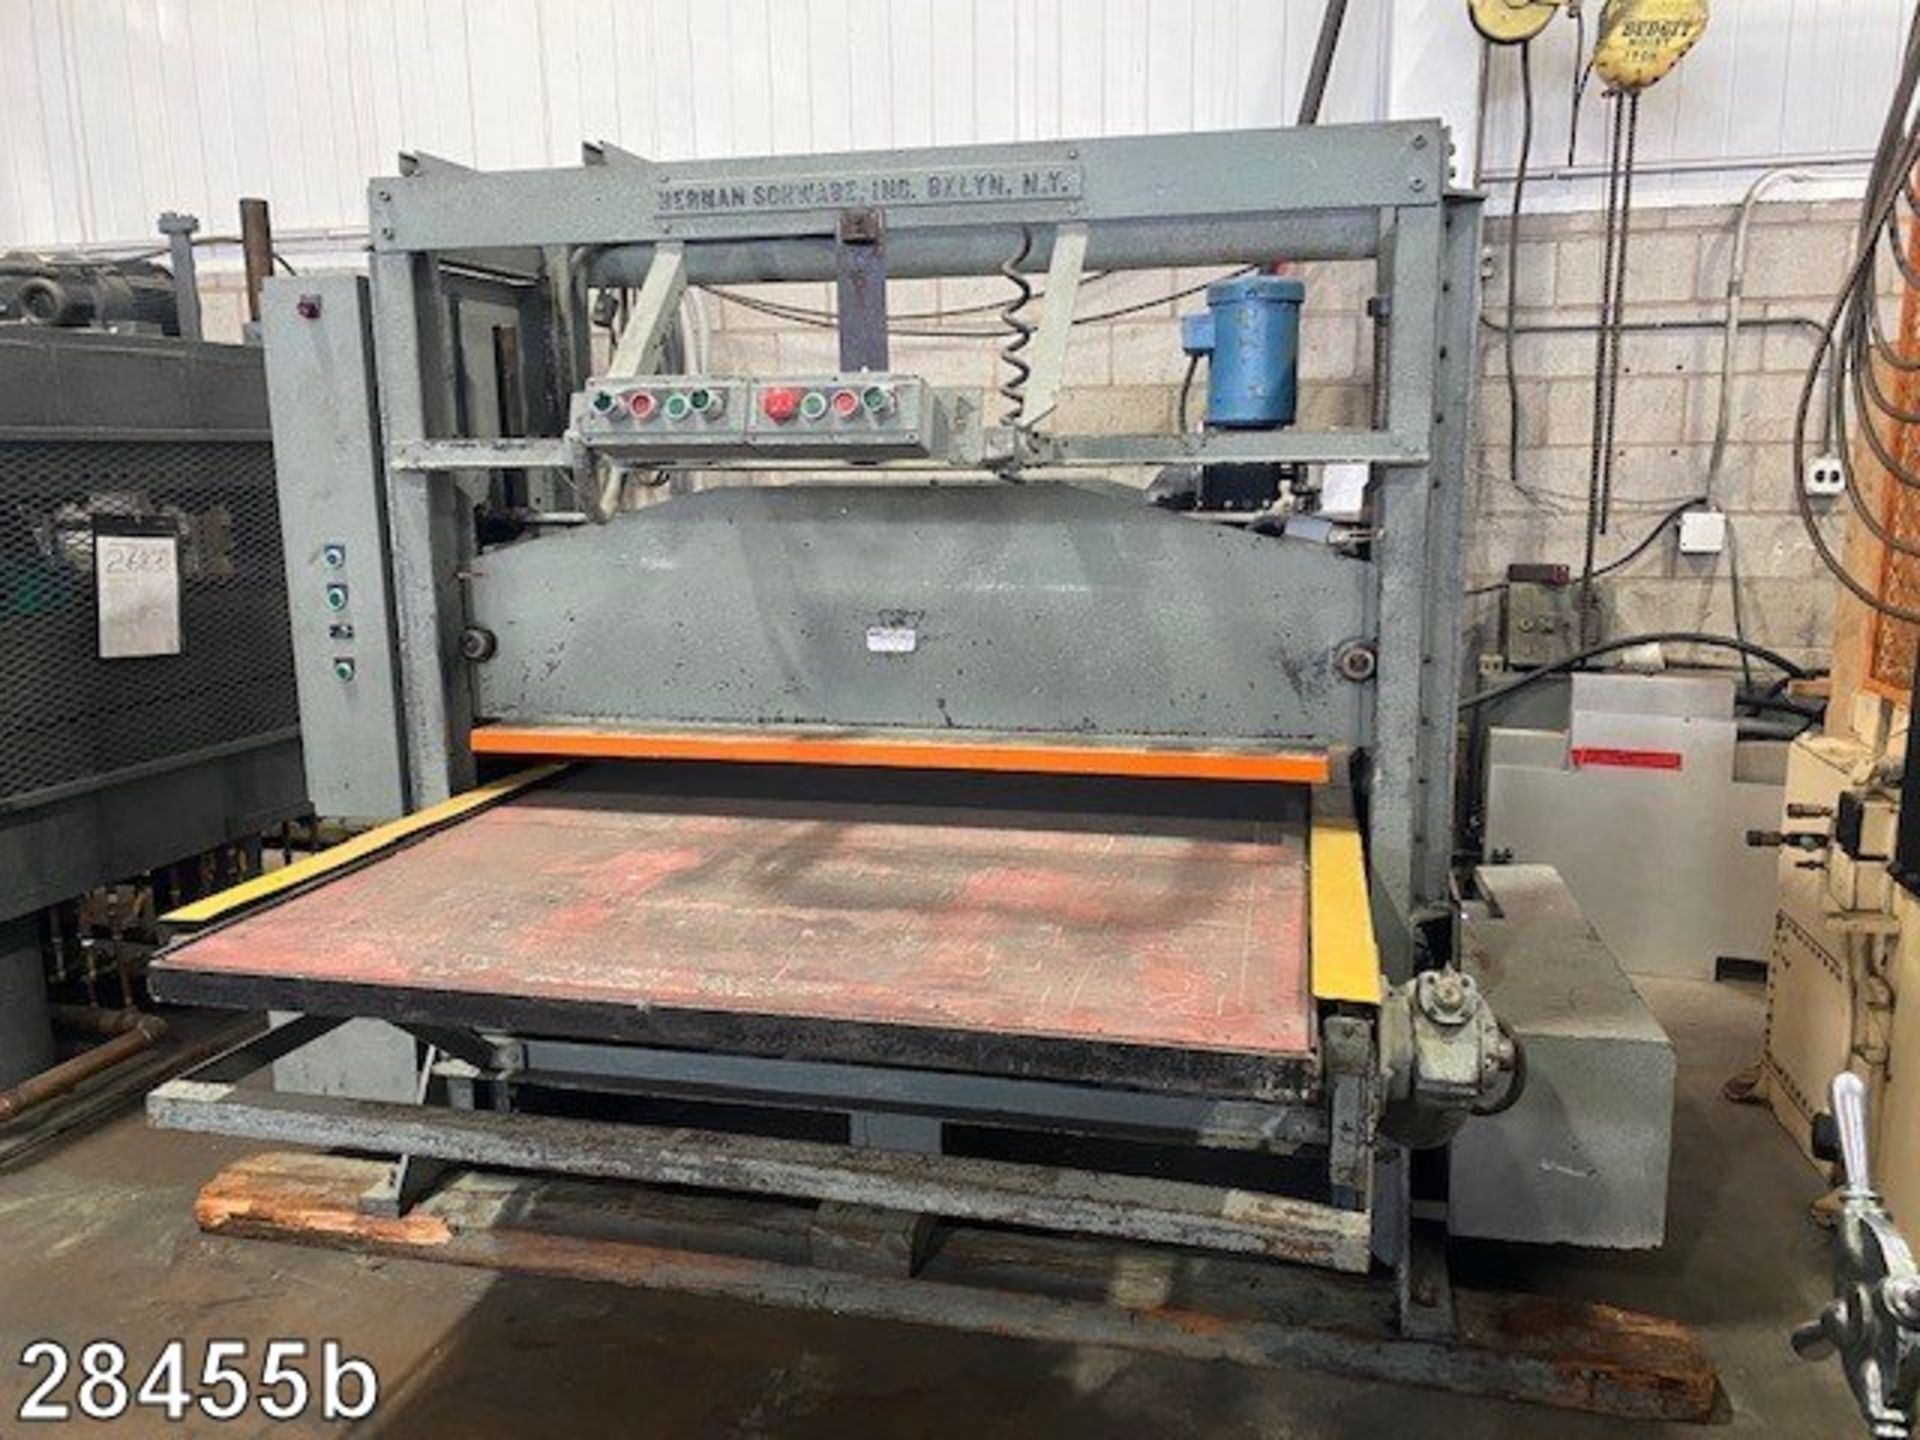 SCHWABE MODEL MST 40 TON (APPROX) DIE CUTTING PRESS WITH SHUTTLE TABLE S/N 70340 - Image 2 of 2